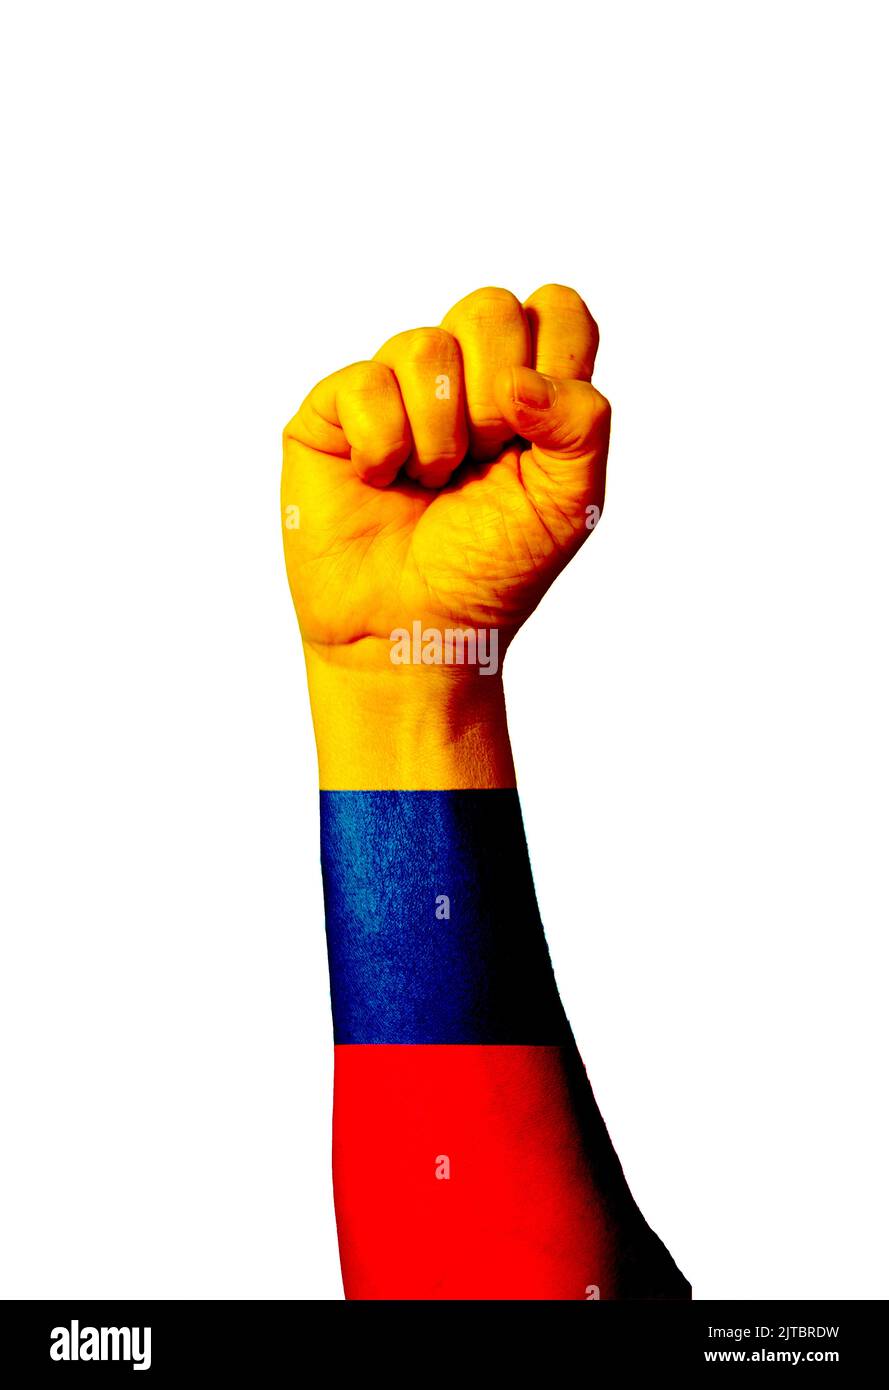 Flag of Colombia painted on human fist. Strength, power, concept of conflict. Raised fist. Stock Photo